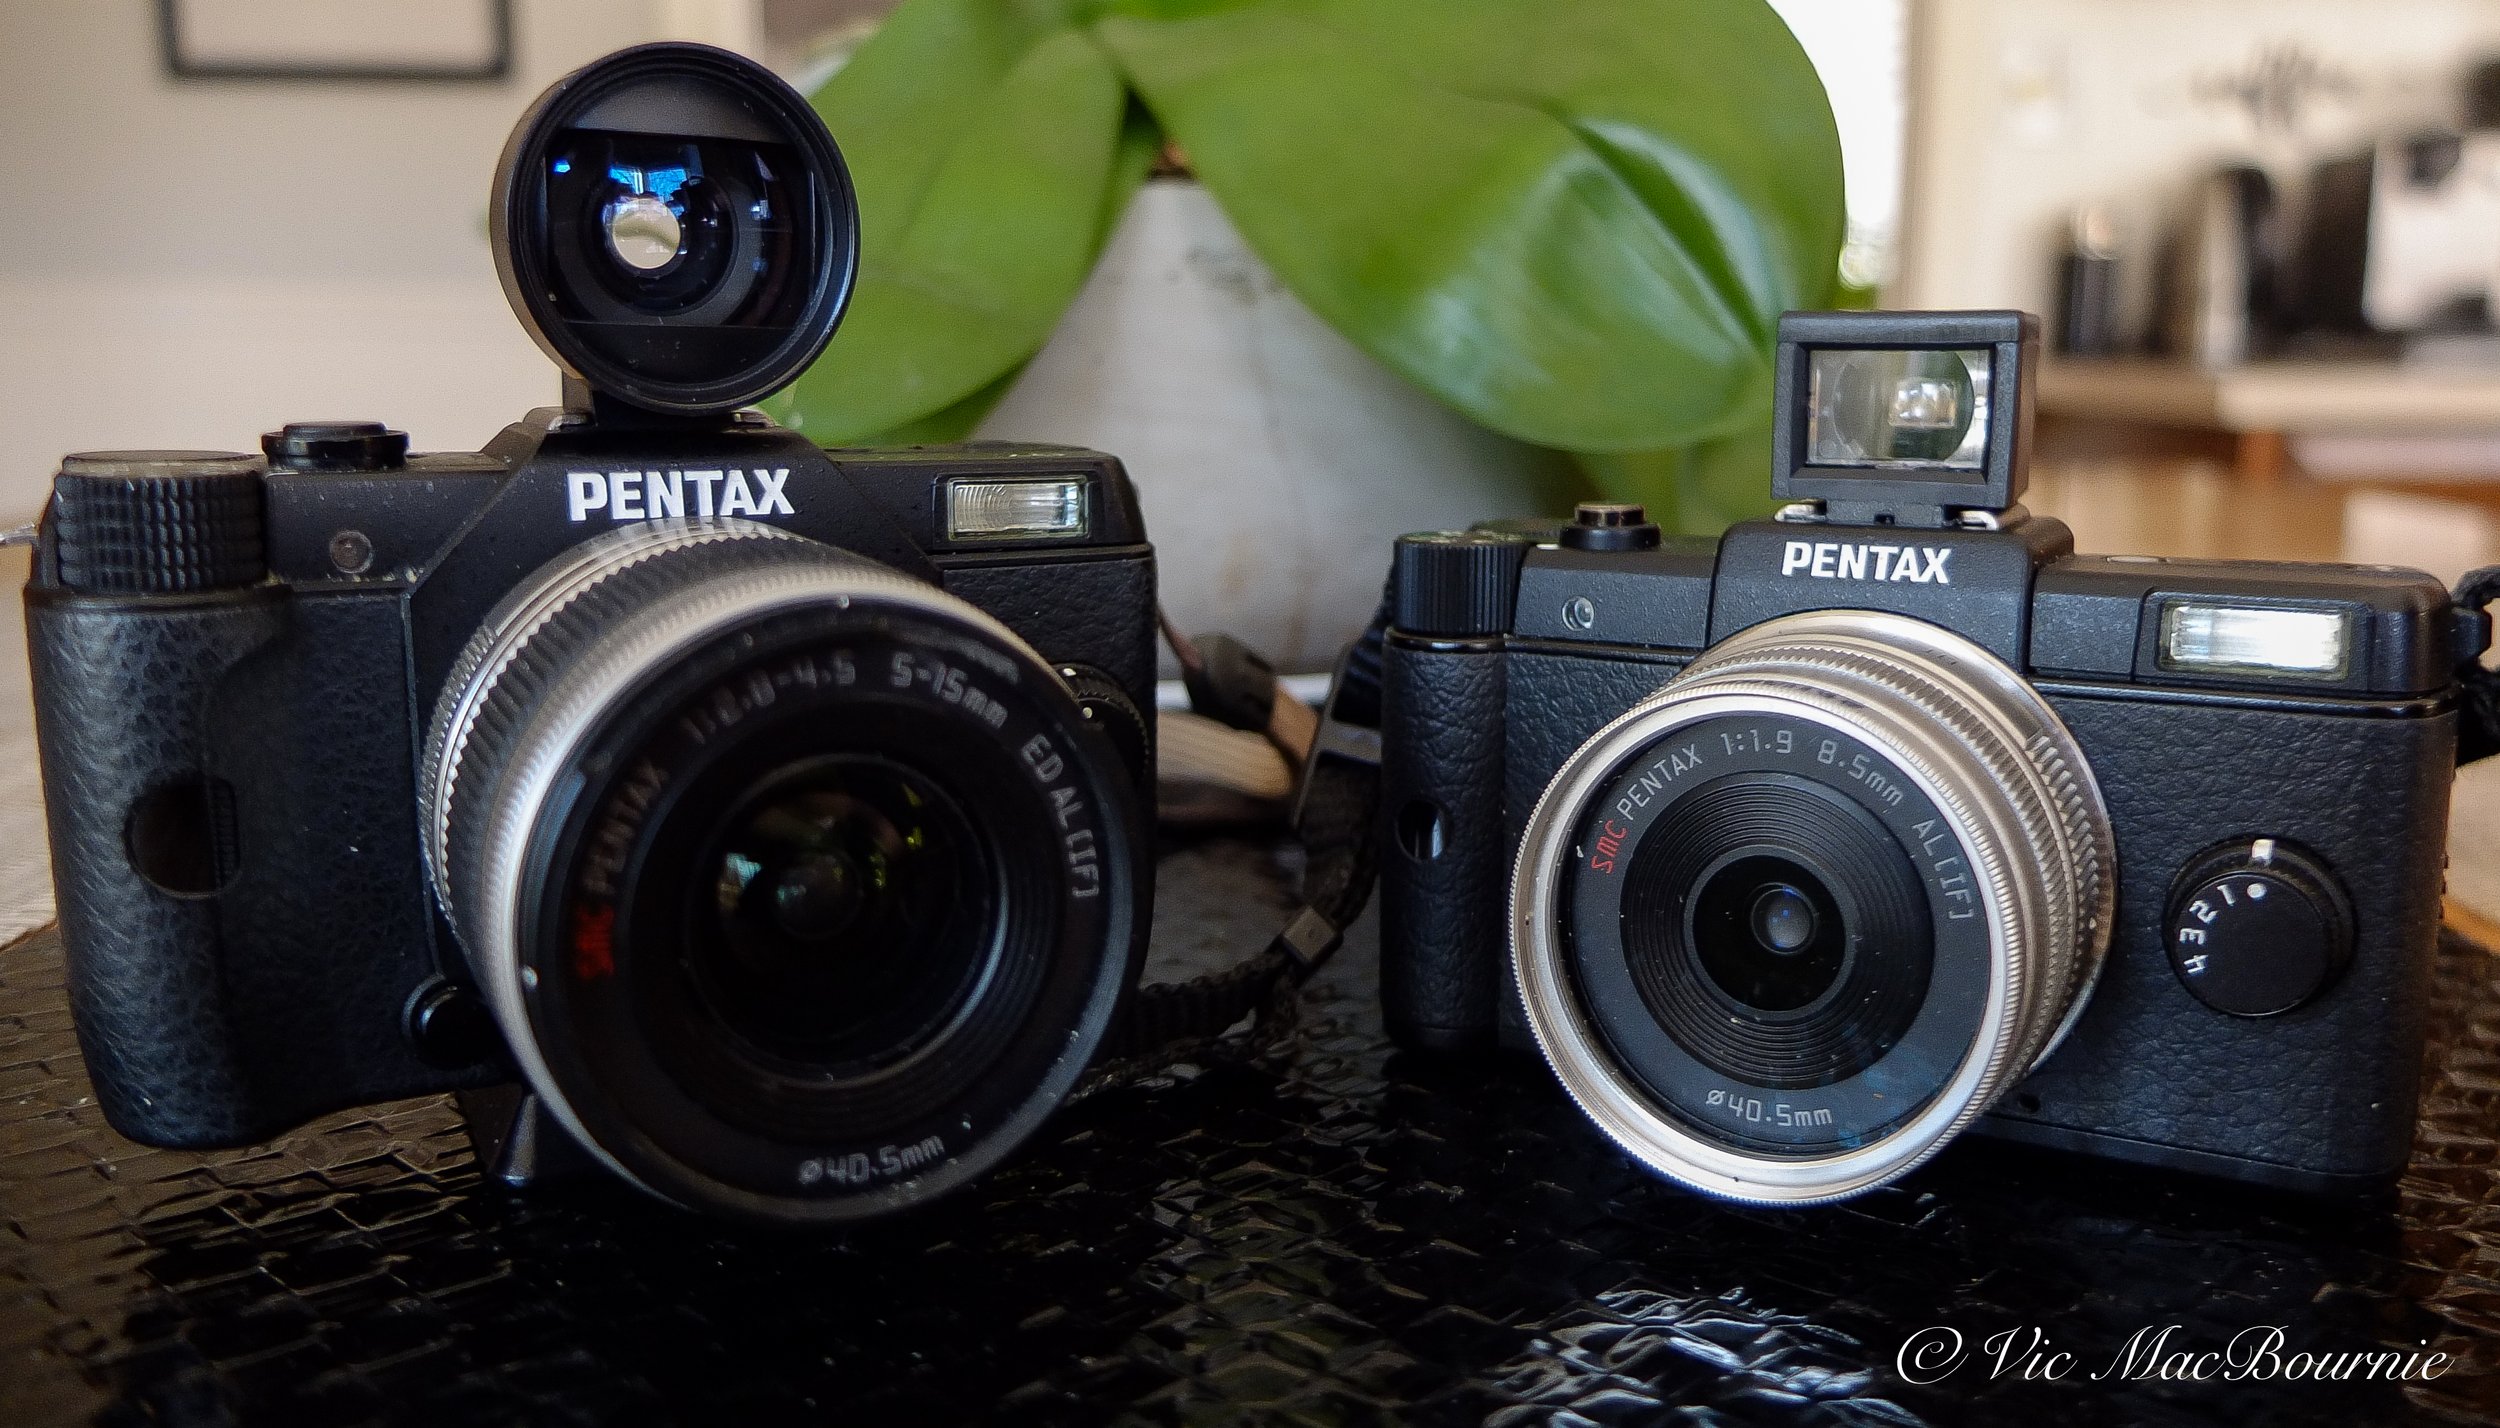 Two external optonal viewfinders on the Pentax Qs. The viewfinder on the left is the TTArtisan 28mm finder and the one on the right is the tiny Lichifit 28mm finder. Both have their place on the Pentax Q line of cameras.